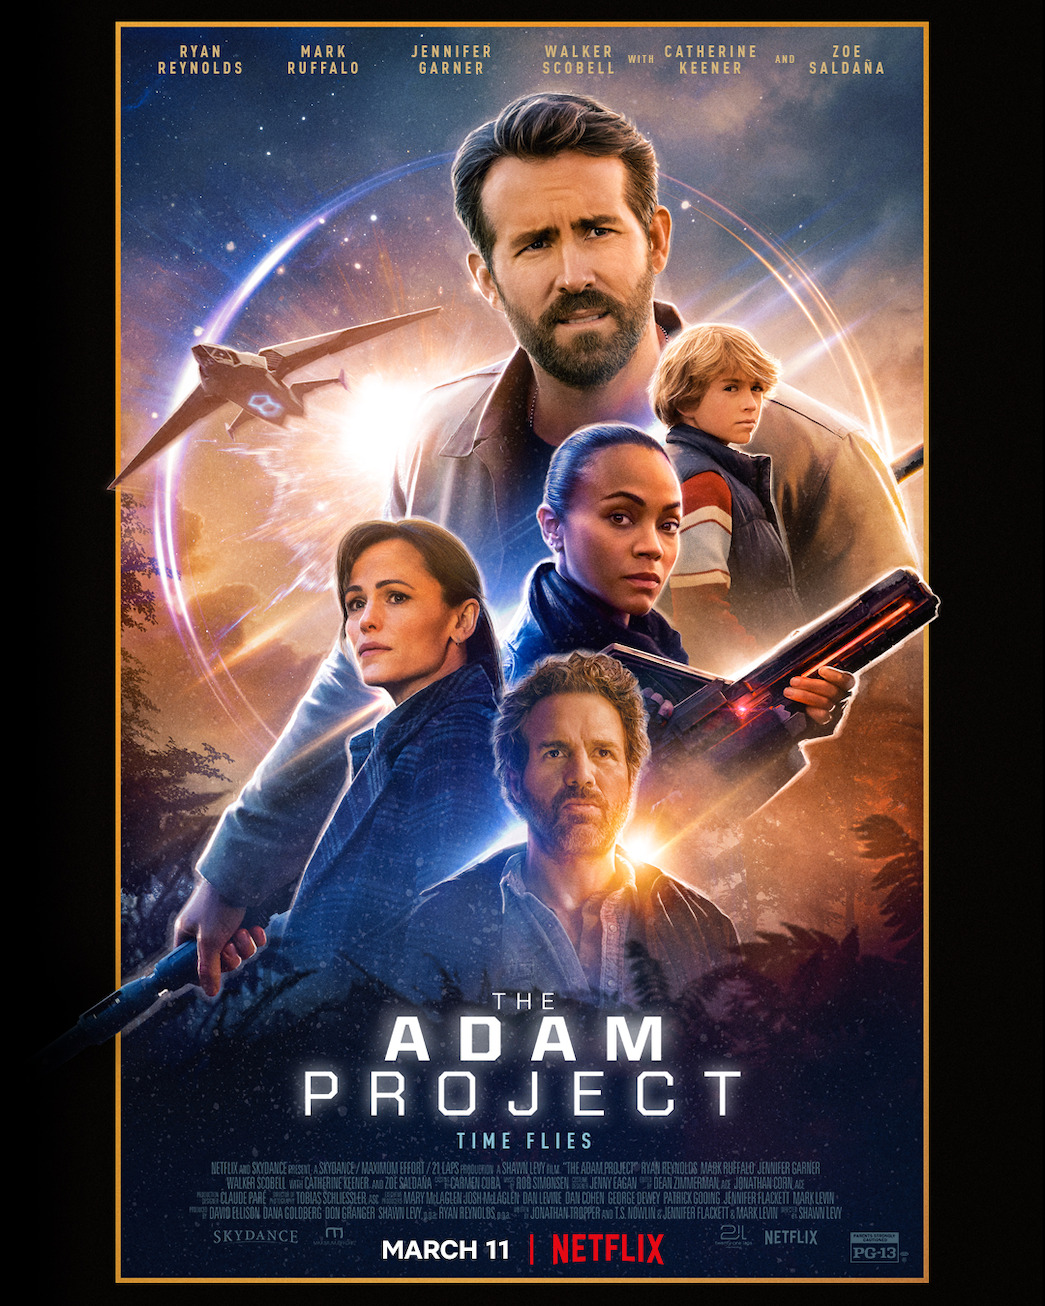 Ryan Reynolds on New Film 'The Adam Project': “A Very Personal Story” – The  Hollywood Reporter